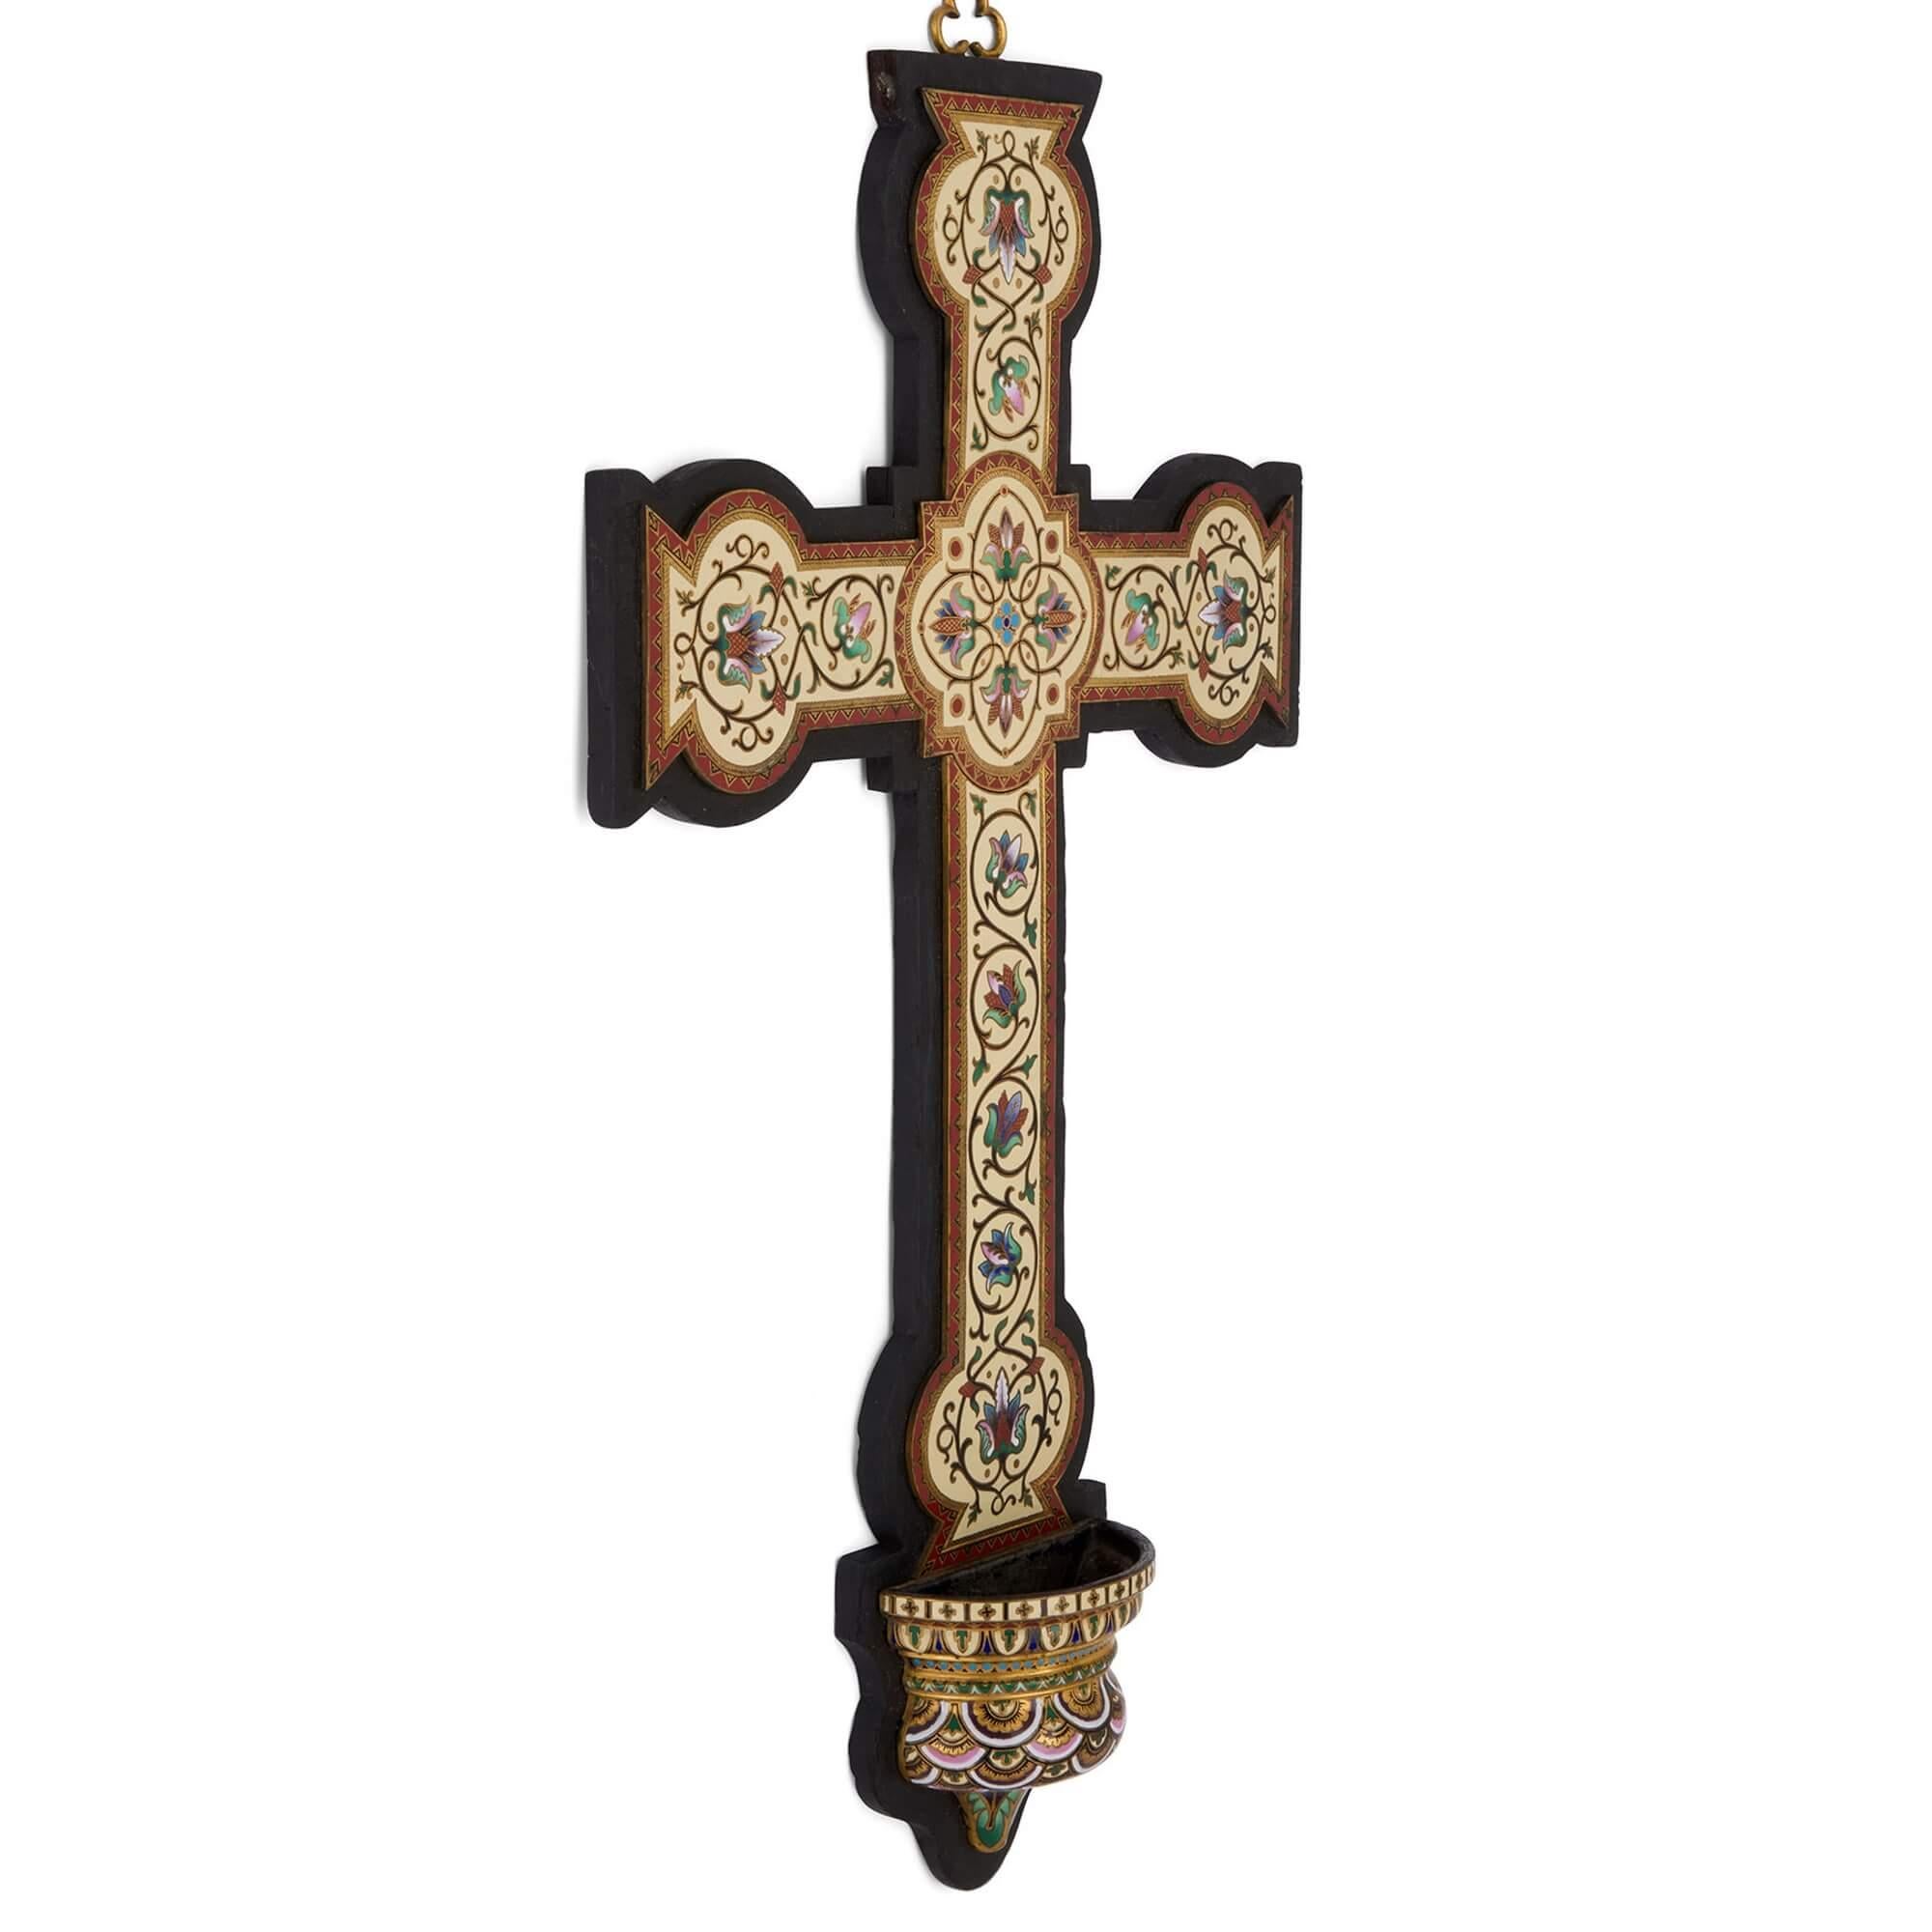 Antique large cloisonné enamel wall crucifix with font 
French, Late 19th Century 
Height 57cm, width 33cm, depth 7cm

This superb decorative cross is designed to hang on a wall, enabled by the small clover-shaped gilt metal handle which surmounts